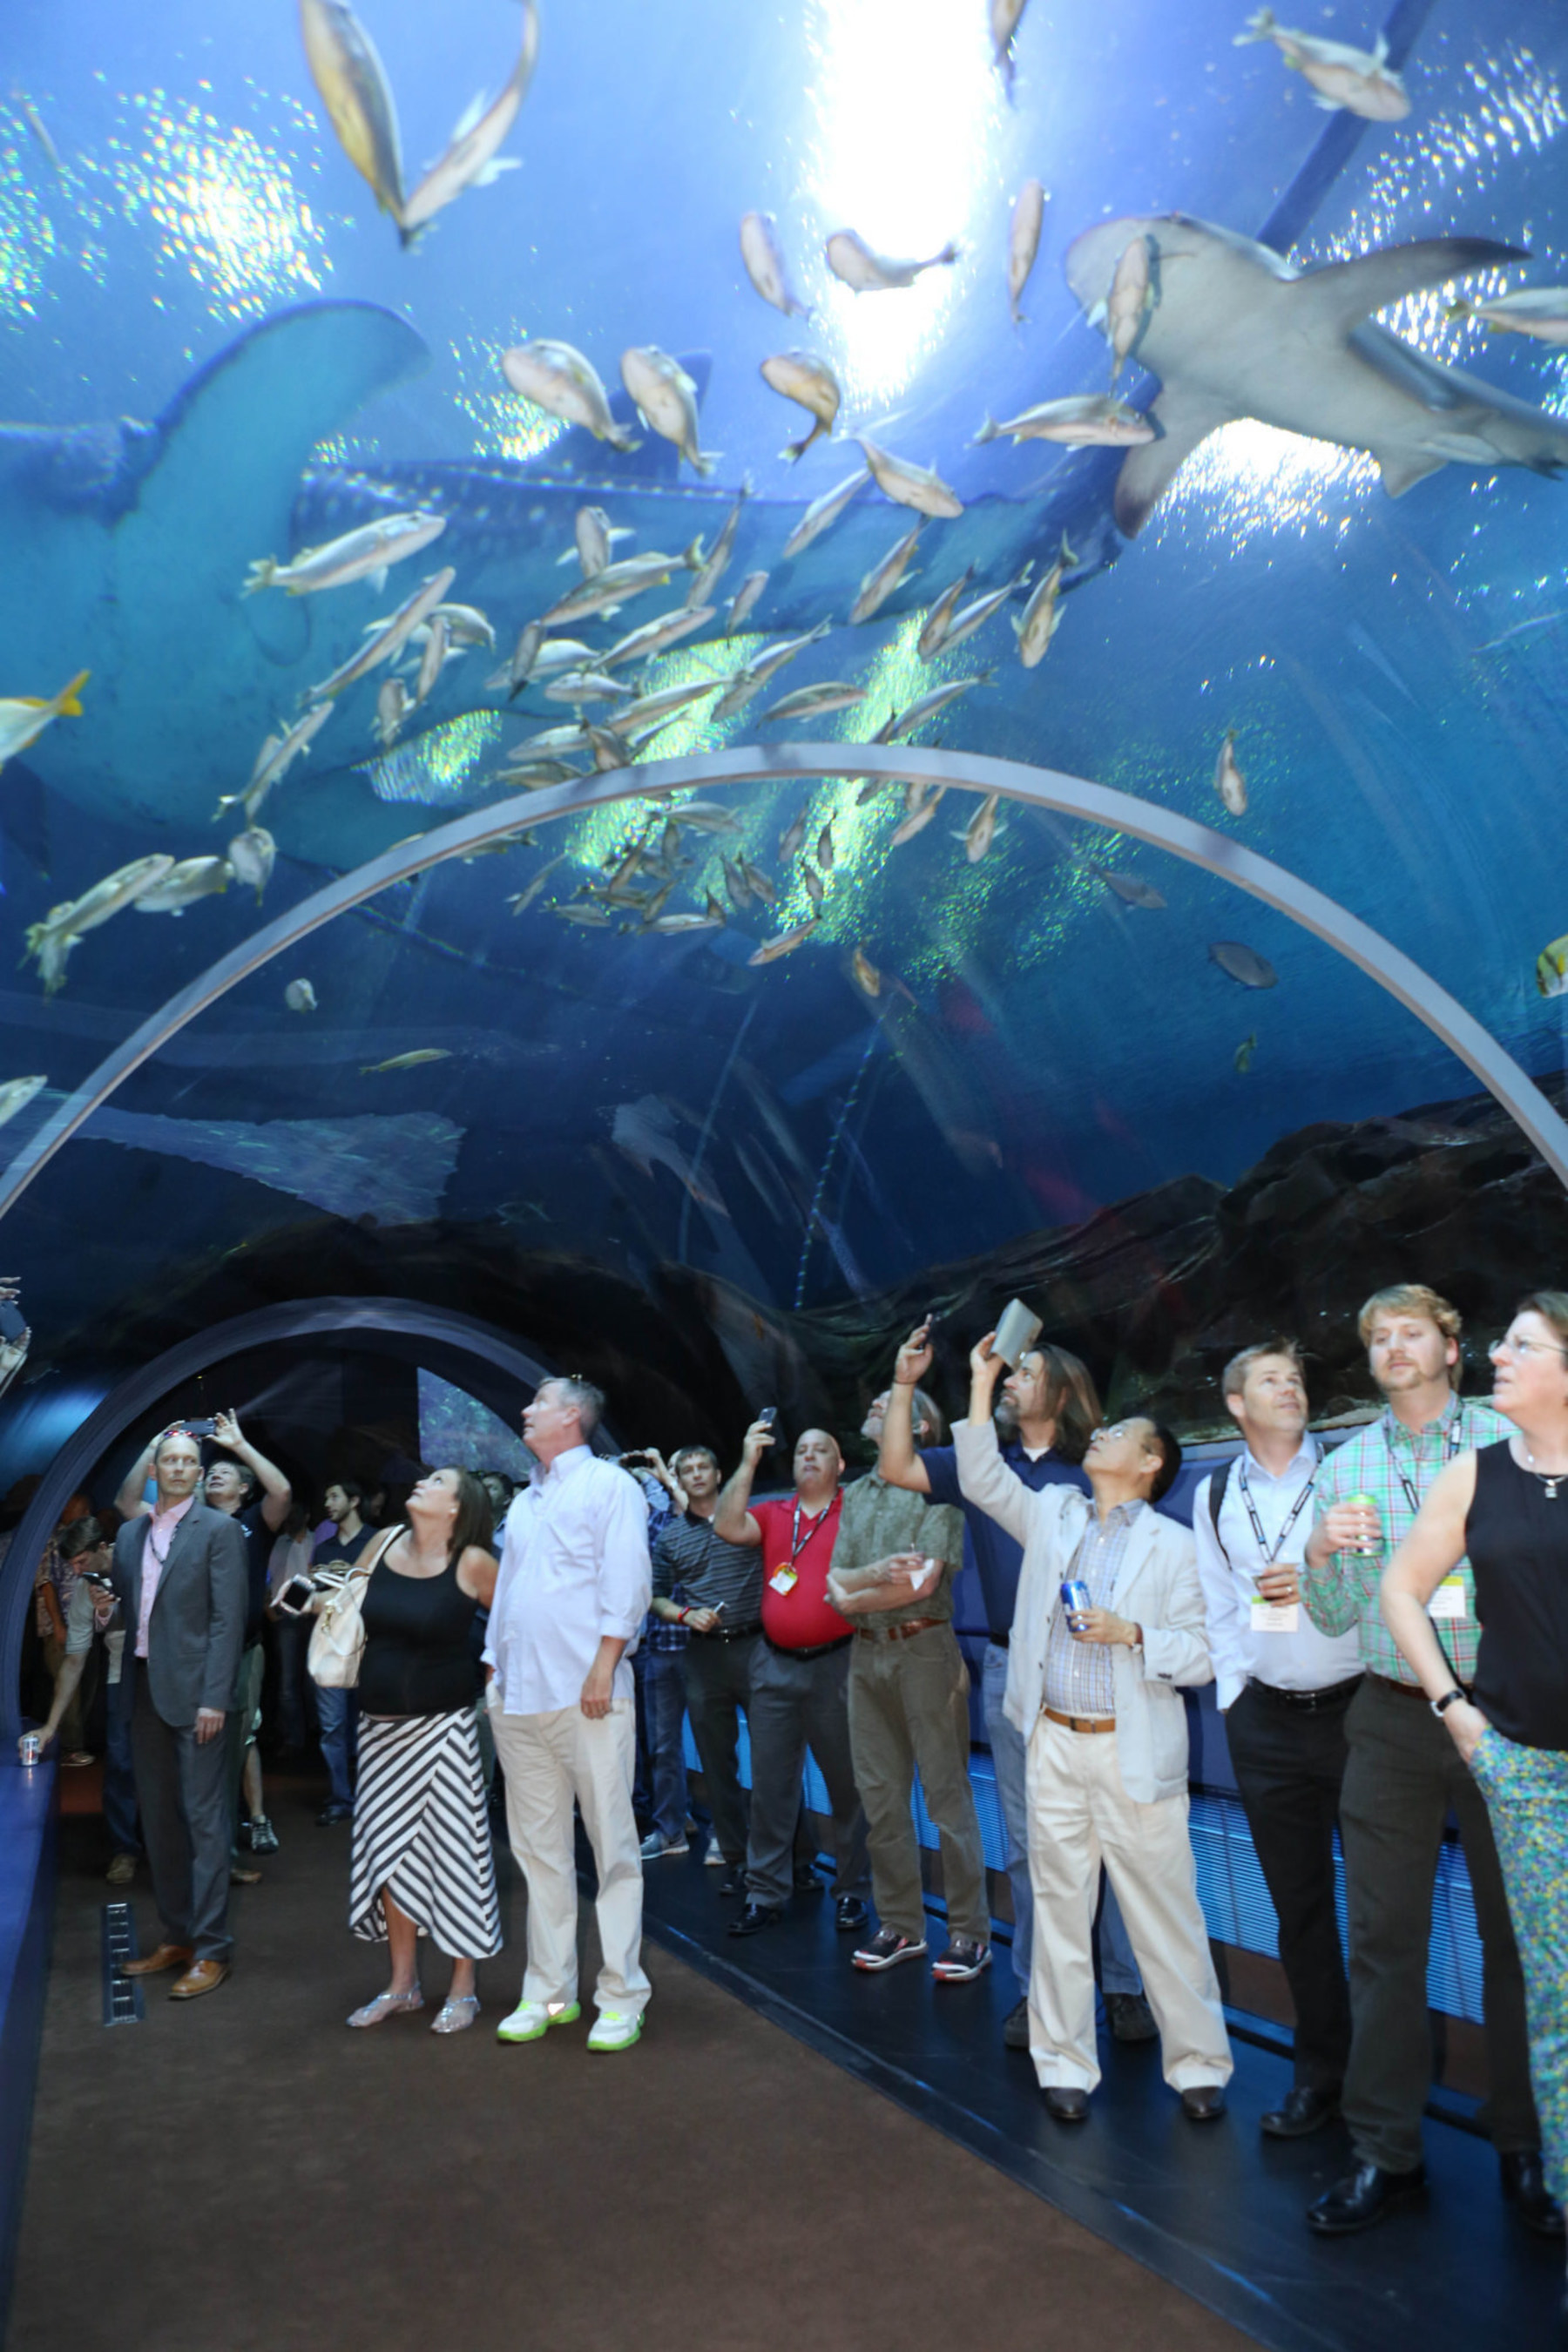 Each year, attendees of AUVSI's flagship event enjoy a blow-out networking event on Wednesday night. In 2015, Northrop Grumman sponsored the event at the Georgia Aquarium.